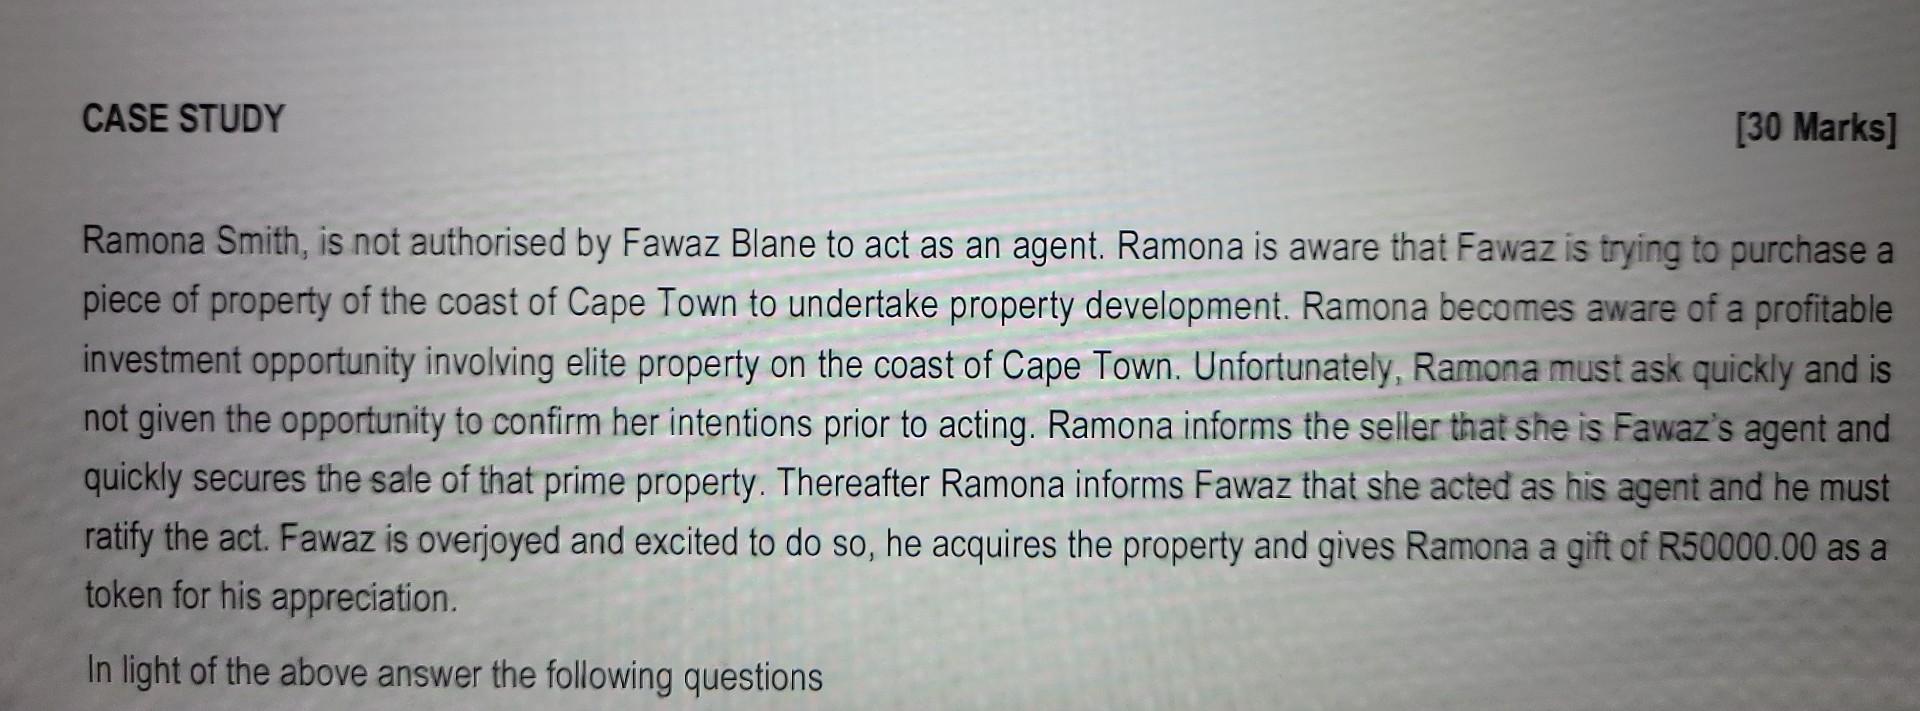 Ramona Smith, is not authorised by Fawaz Blane to act as an agent. Ramona is aware that Fawaz is trying to purchase a piece o